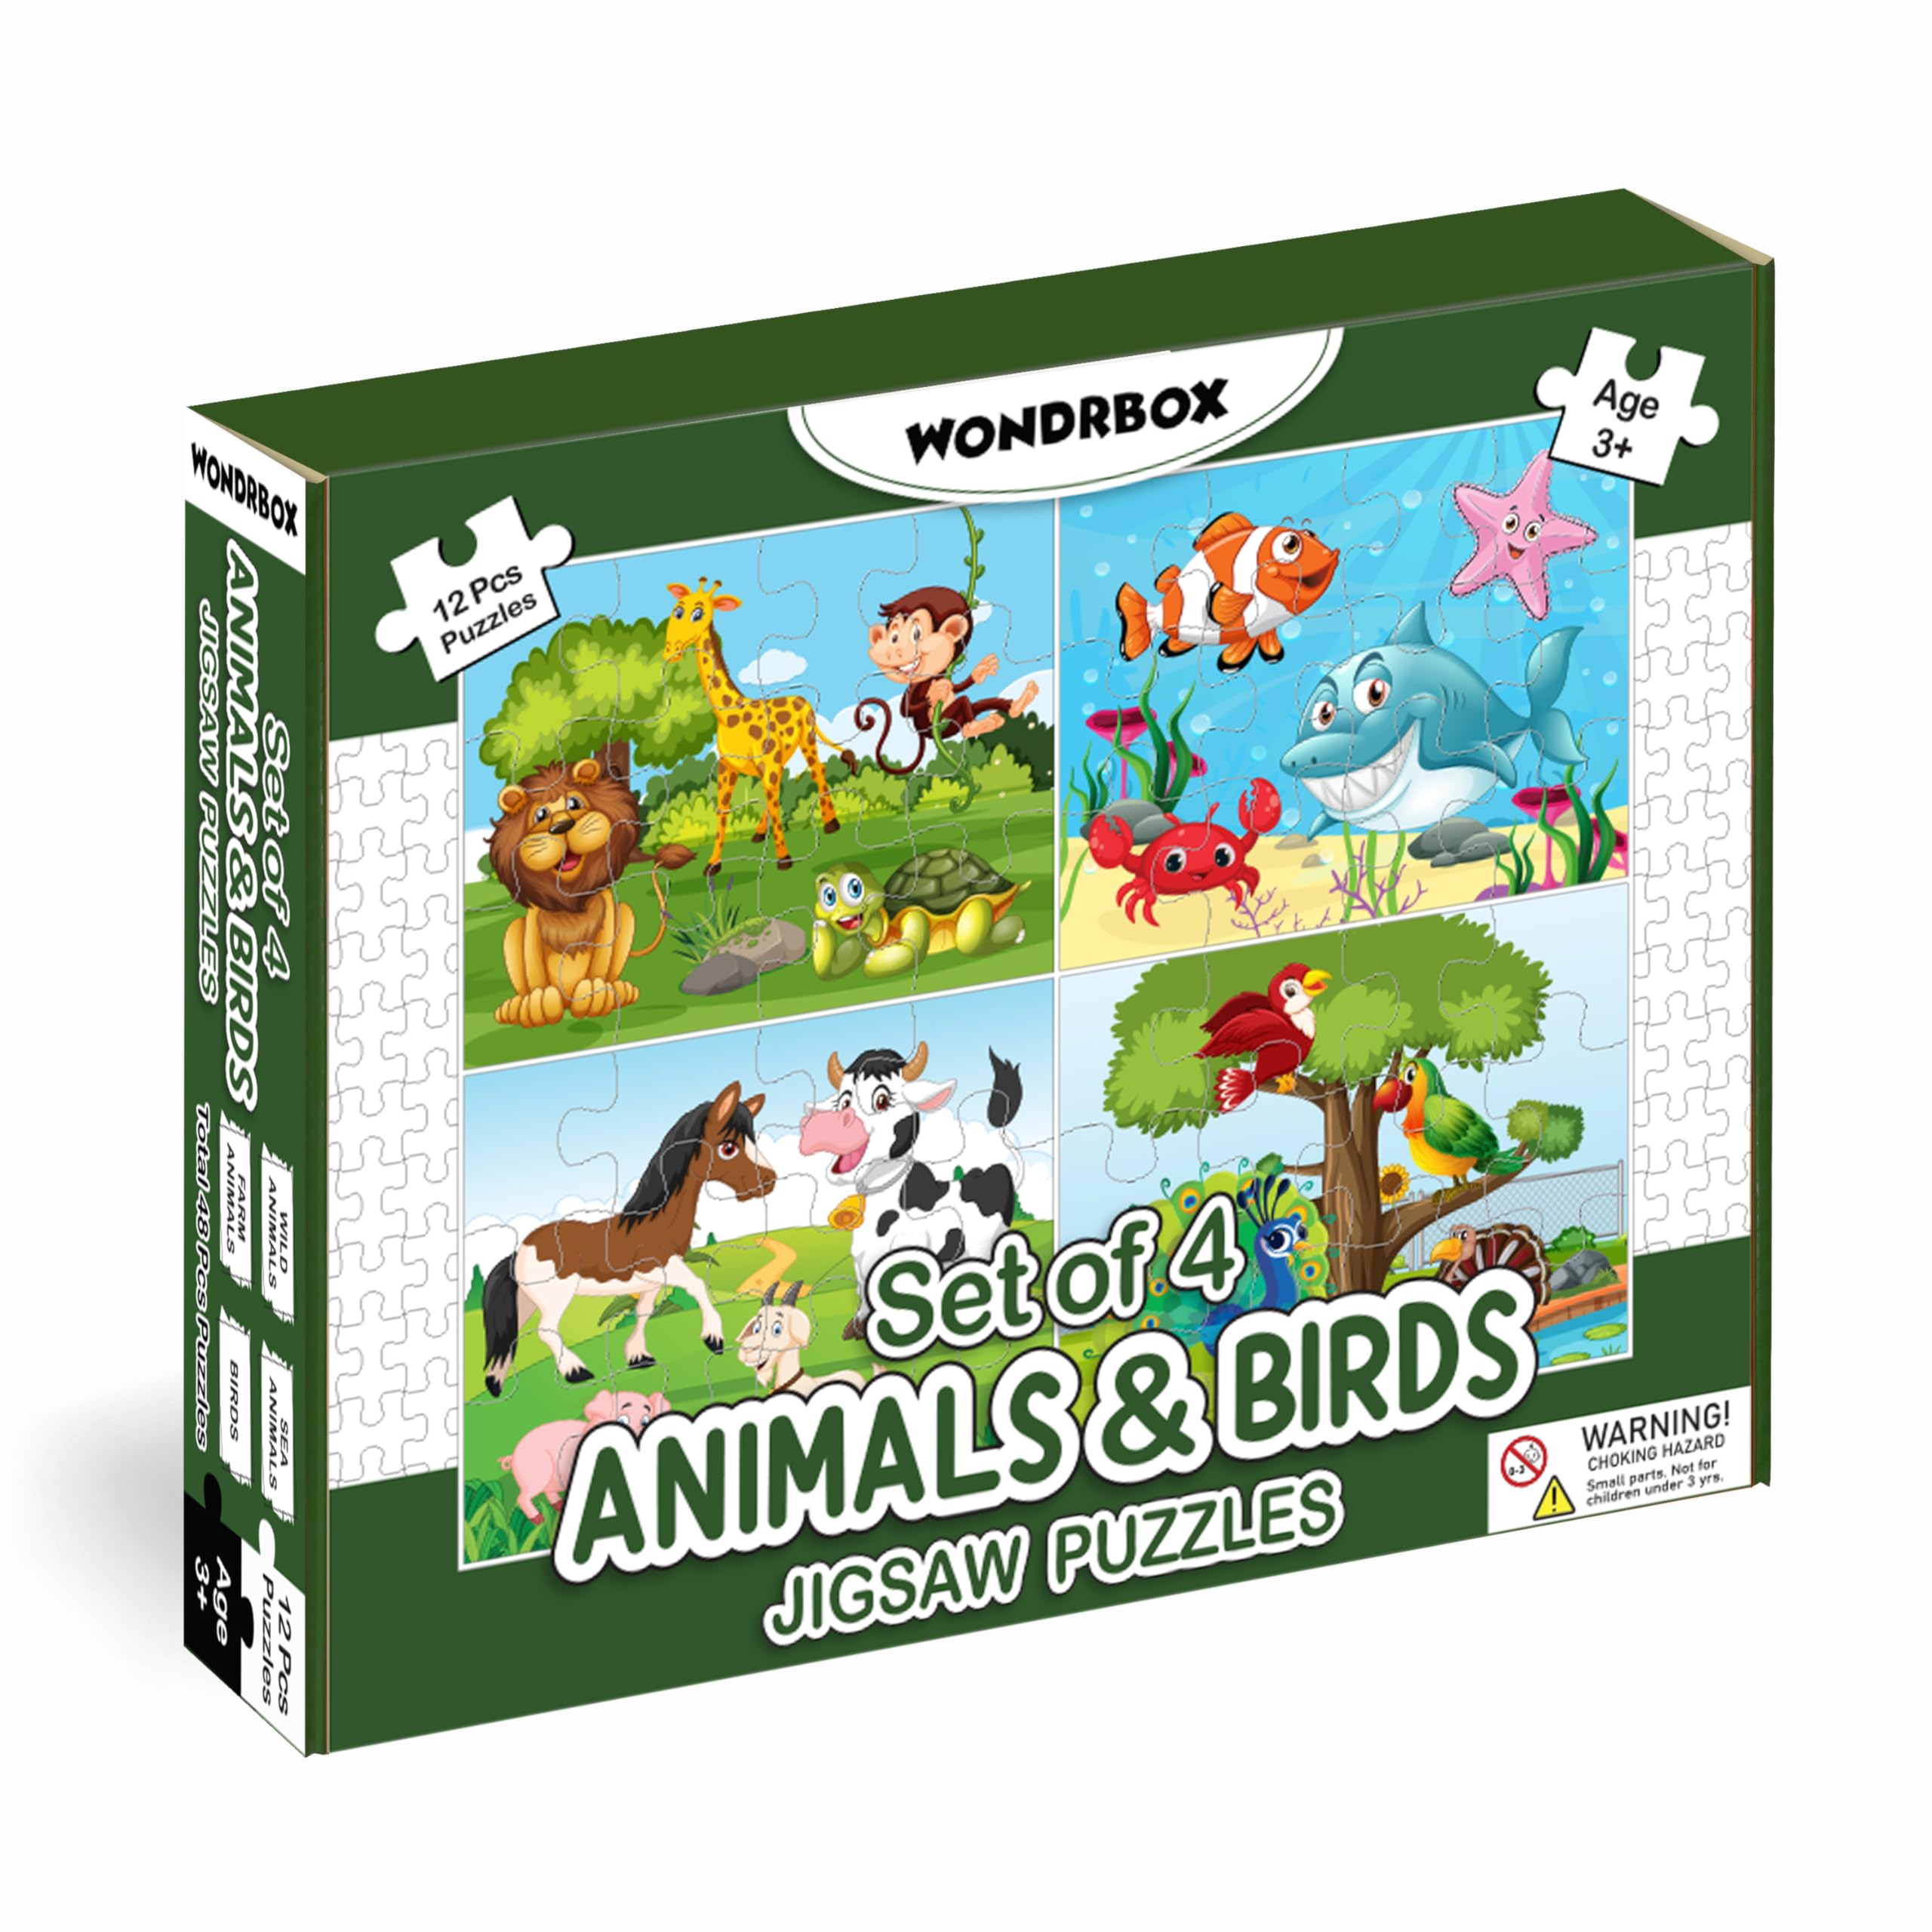 WONDRBOX Animal and Birds Jigsaw Puzzles for Kids | Educational Toy for The Kids Age 3 and Above| Boost Memory Skills | 12 Pieces Jigsaw Puzzles for Kids (Animals & Birds,Set of 4 Puzzles in Box